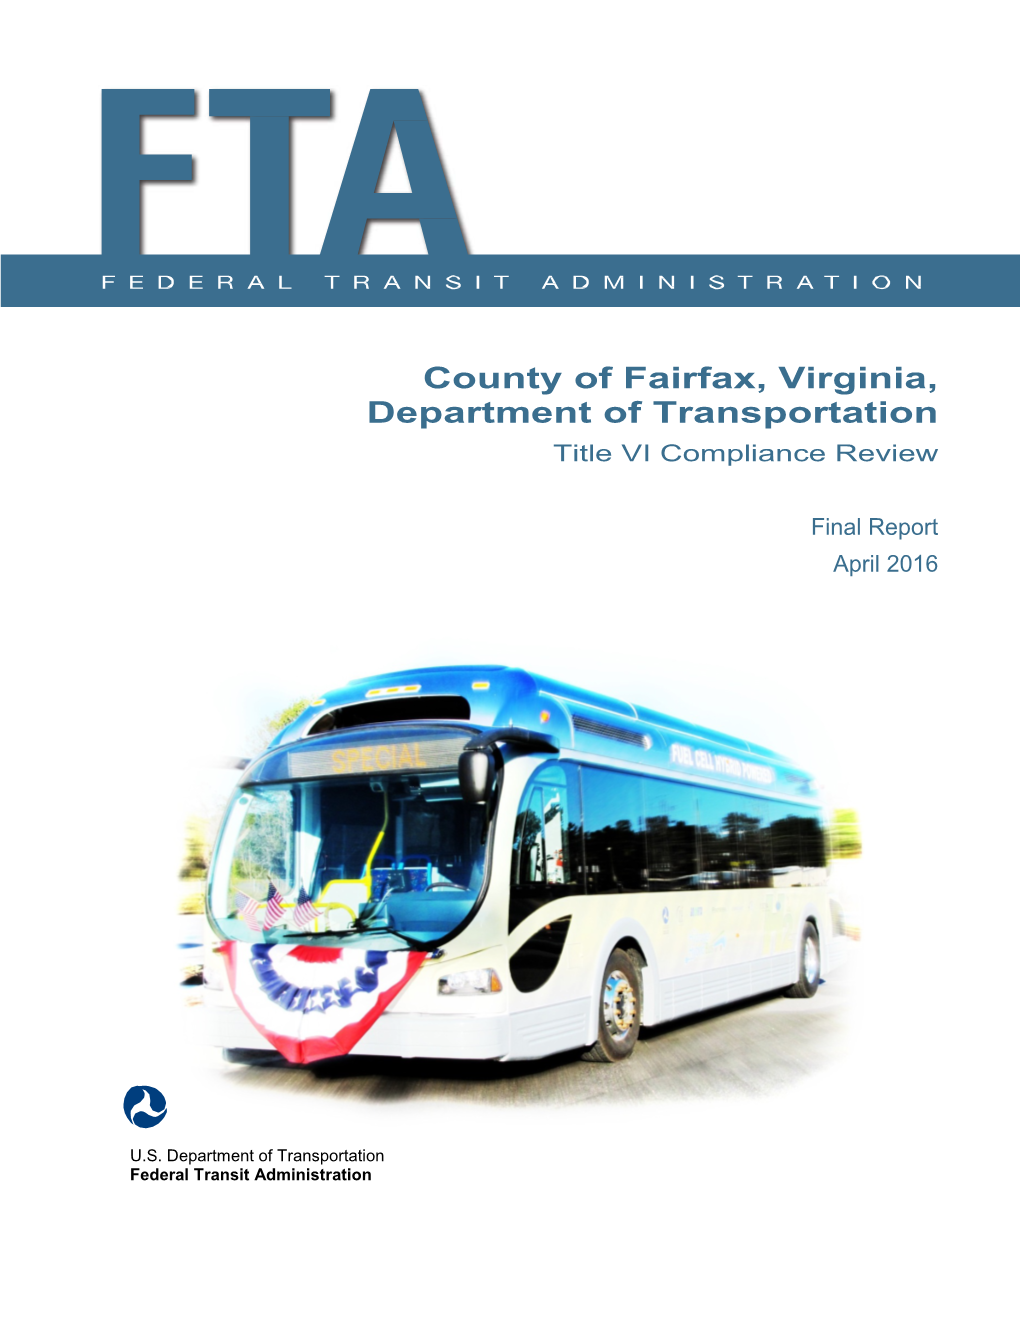 County of Fairfax, Virginia, Department of Transportation Title VI Compliance Review